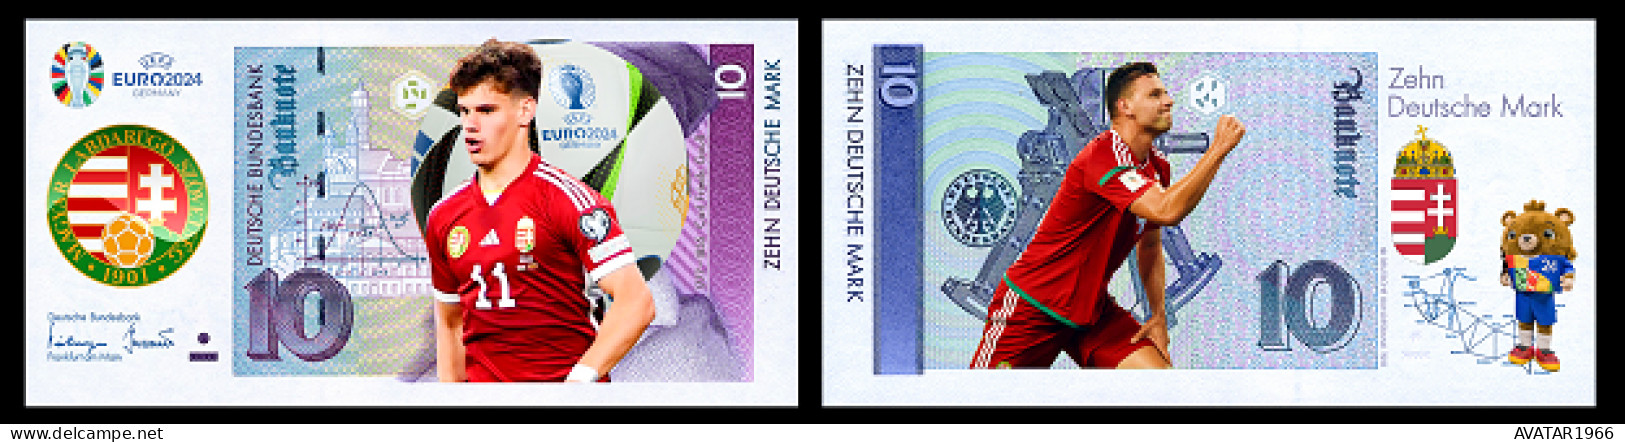 UEFA European Football Championship 2024 Qualified Country Hungary 8 Pieces Germany Fantasy Paper Money - Gedenkausgaben